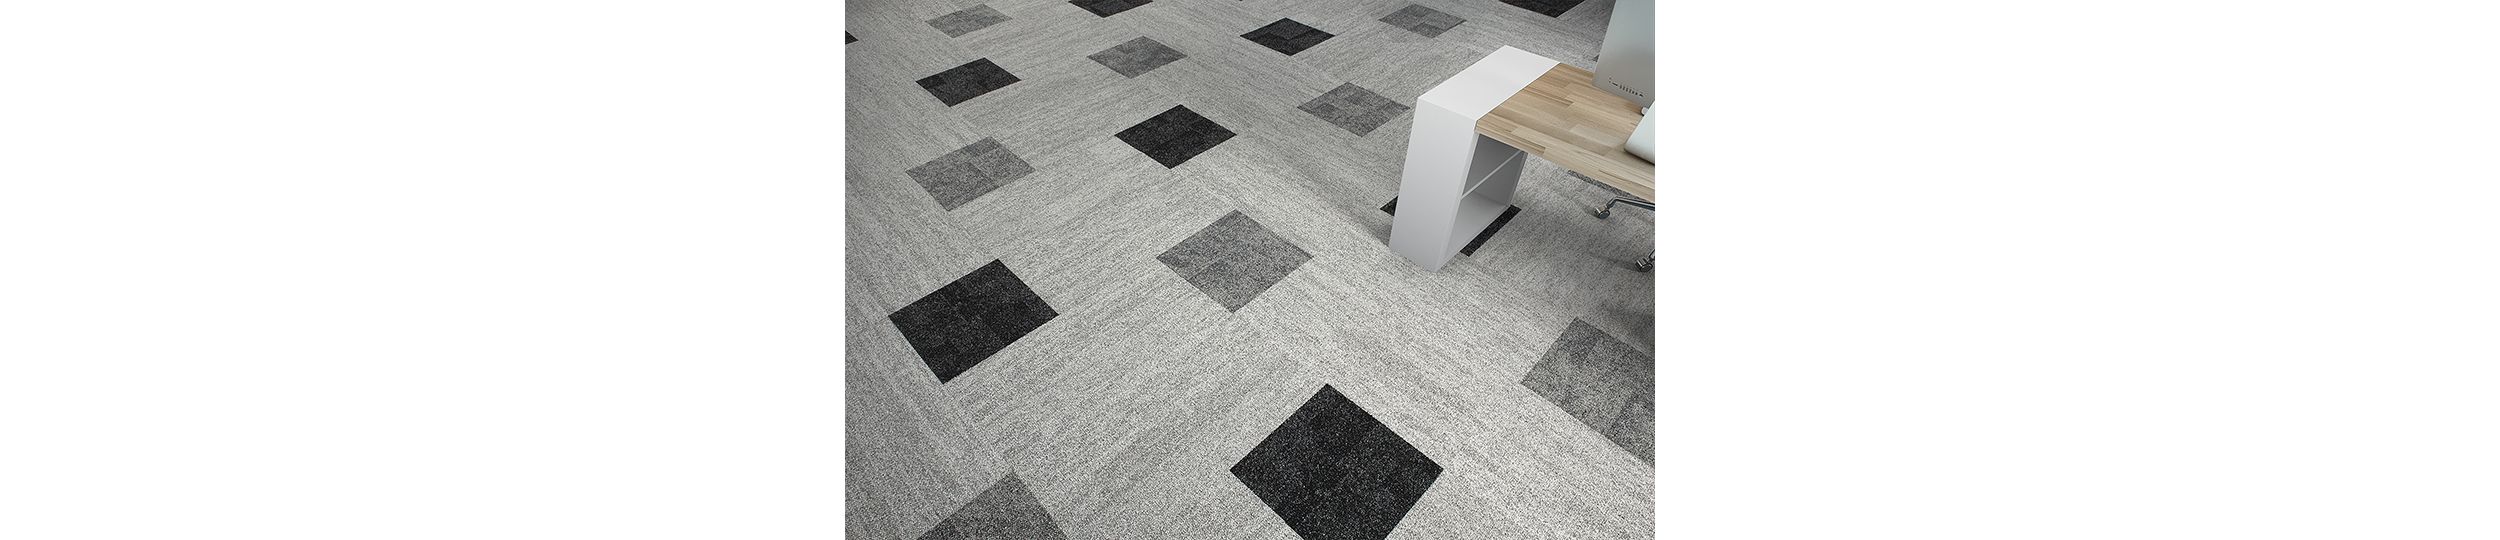 Interface Open Air 402 plank carpet tile in floor view with small workstation off to the right numéro d’image 3